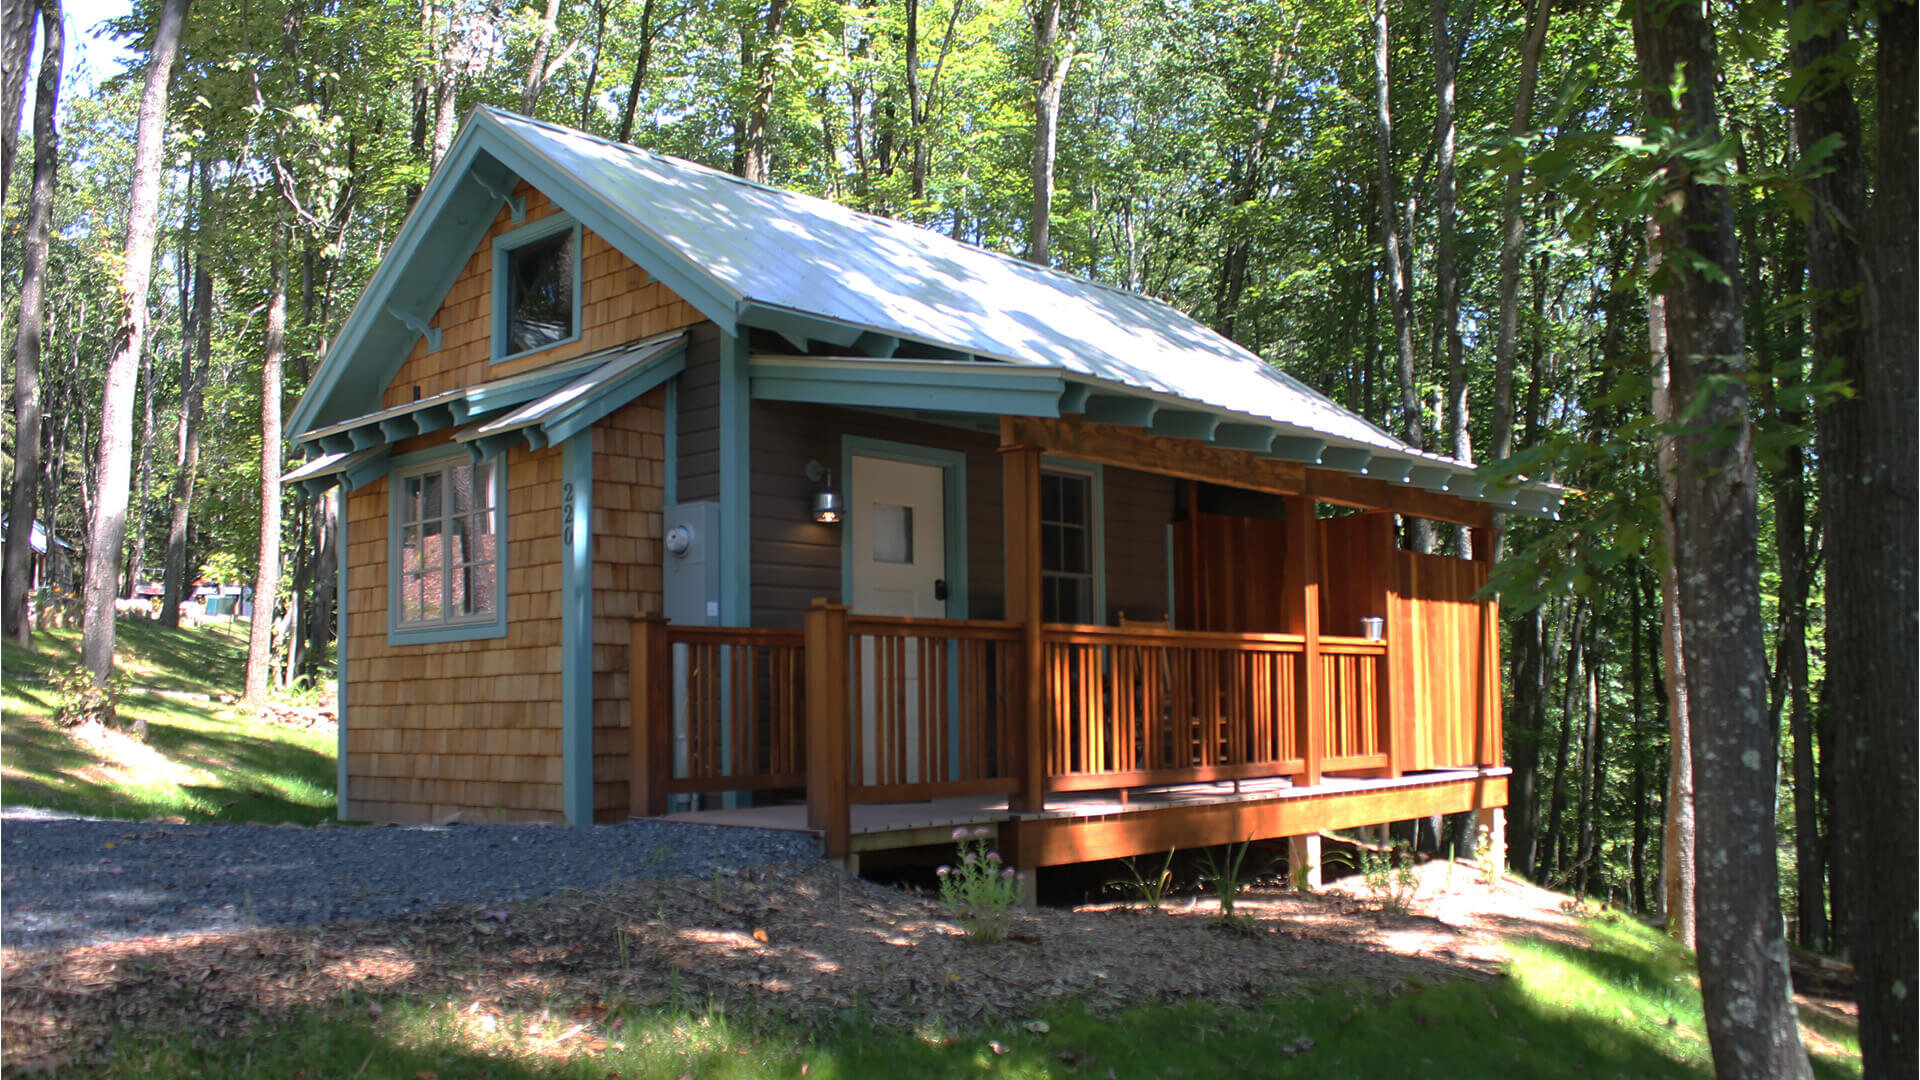  ADA compliant tiny home with ground-level porch and outdoor shower on the porch.  